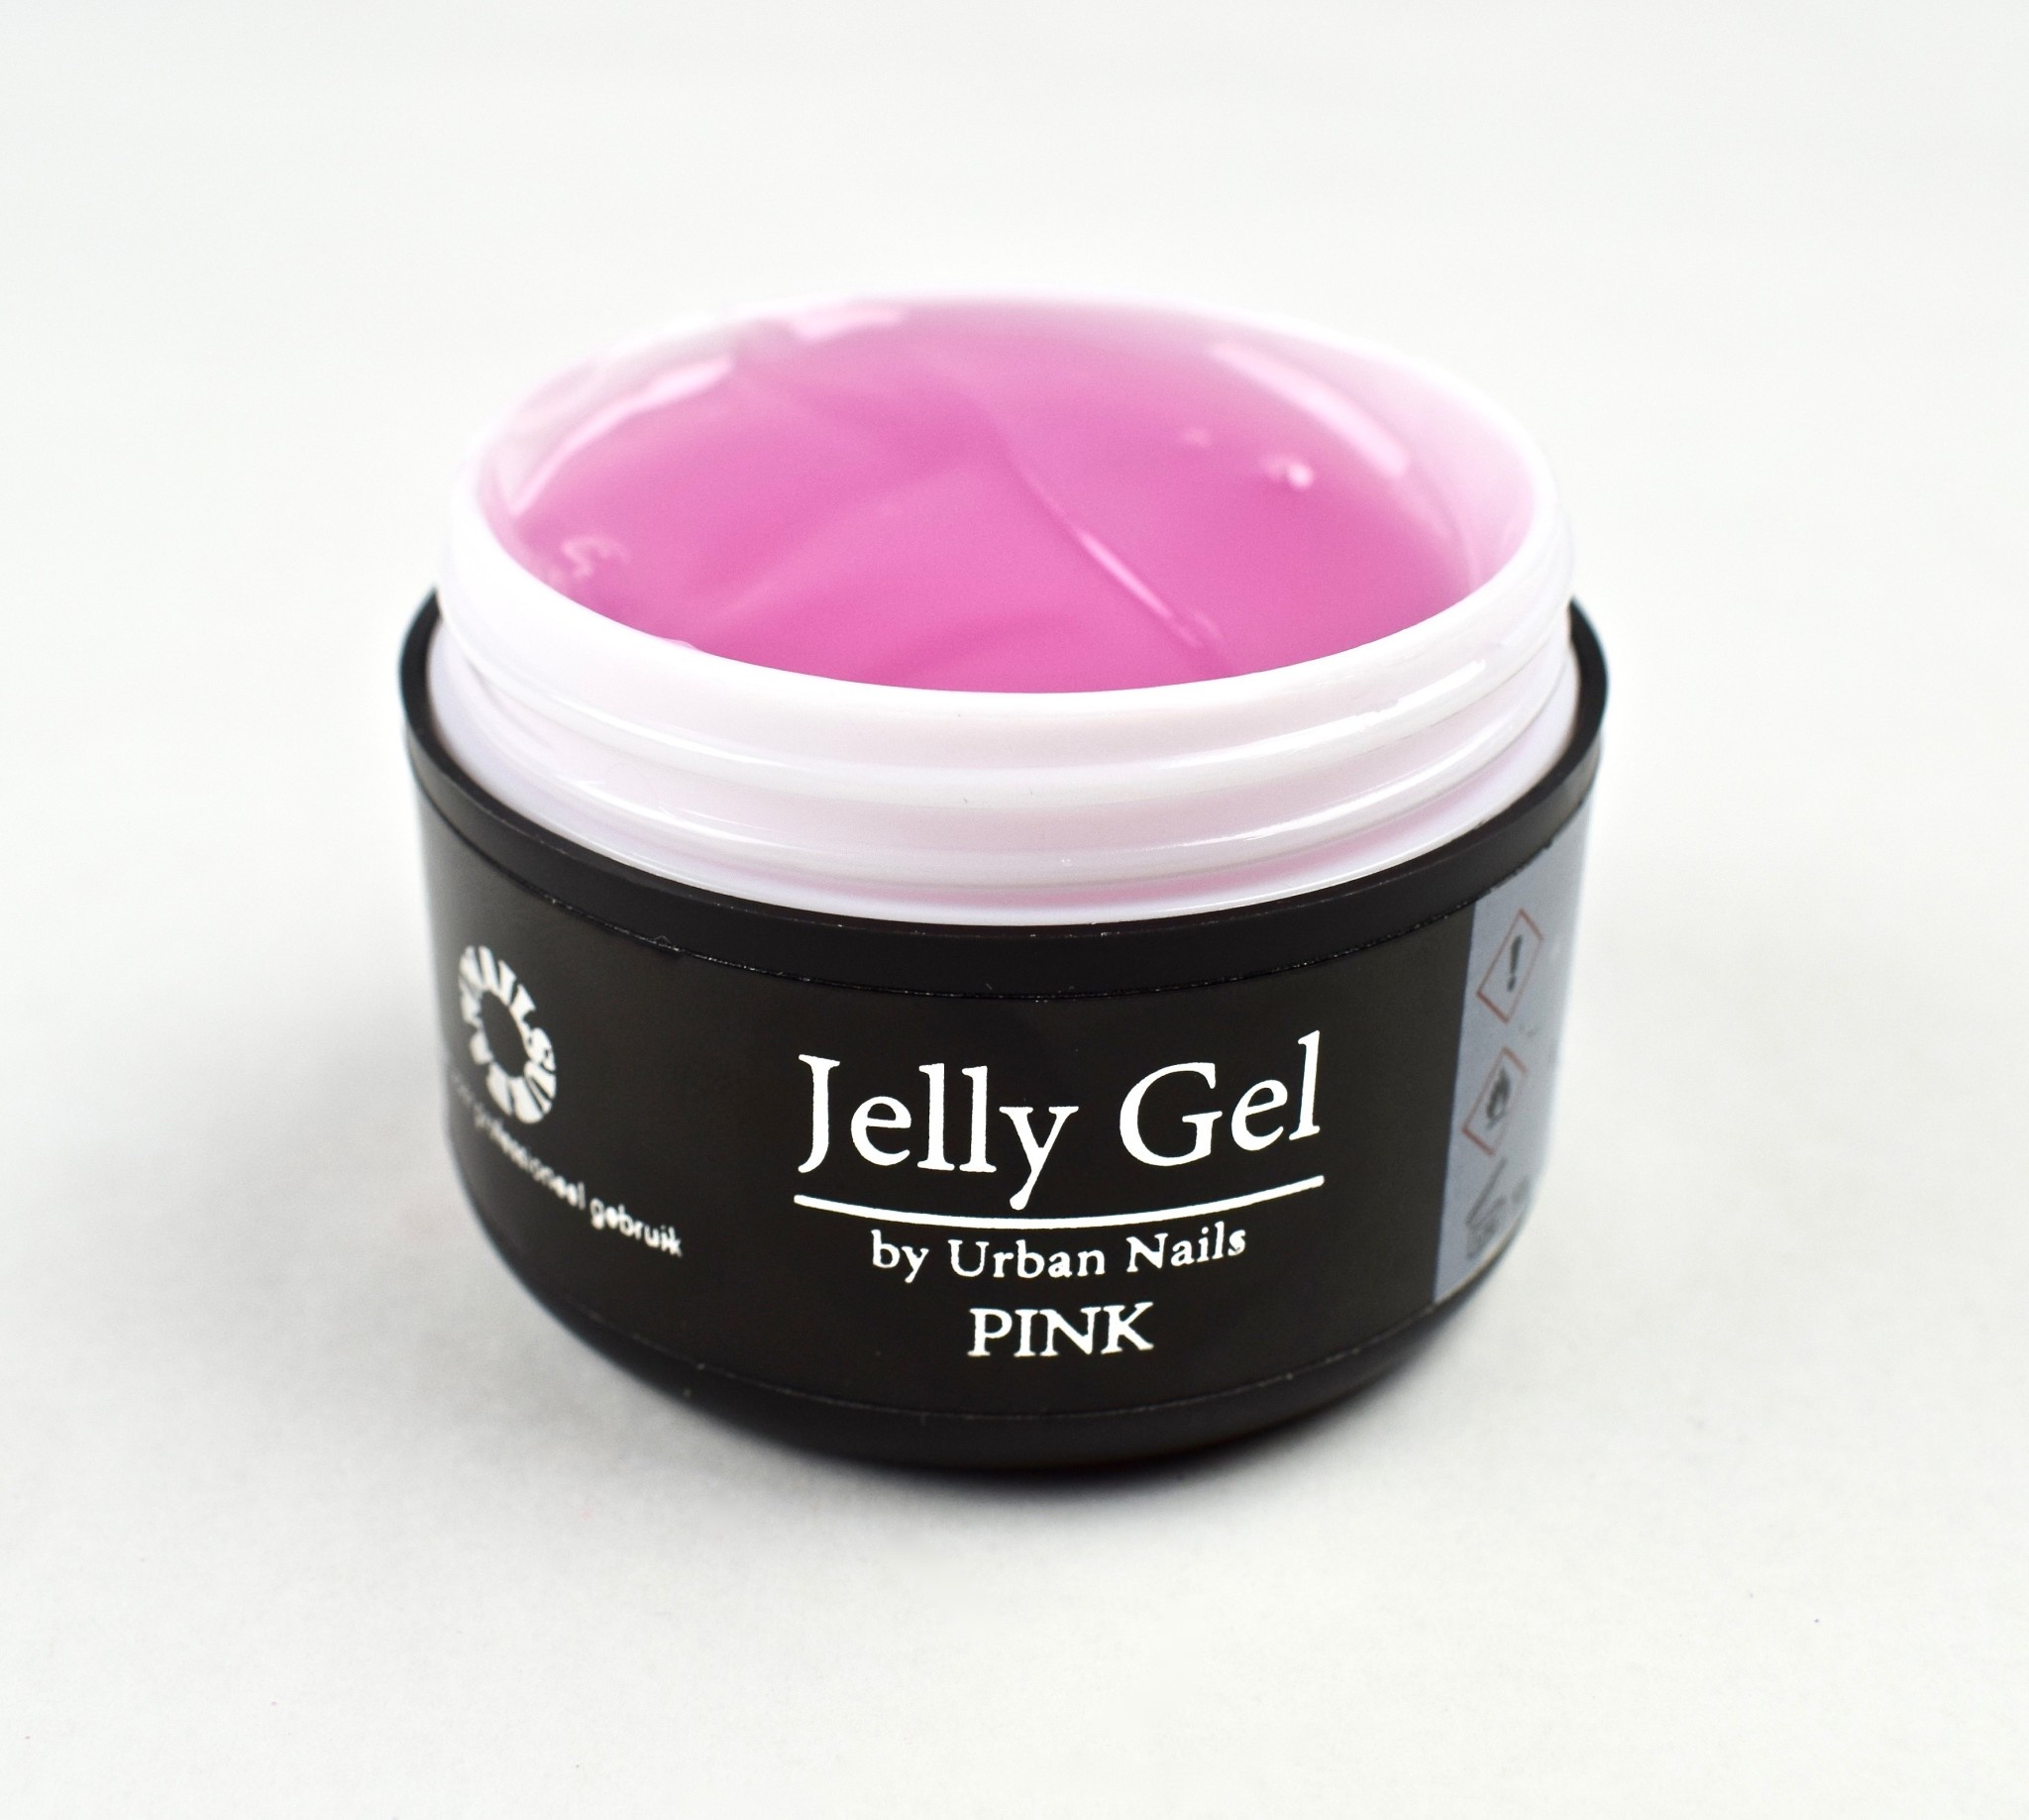 Urban Nails Jelly Gel Pink